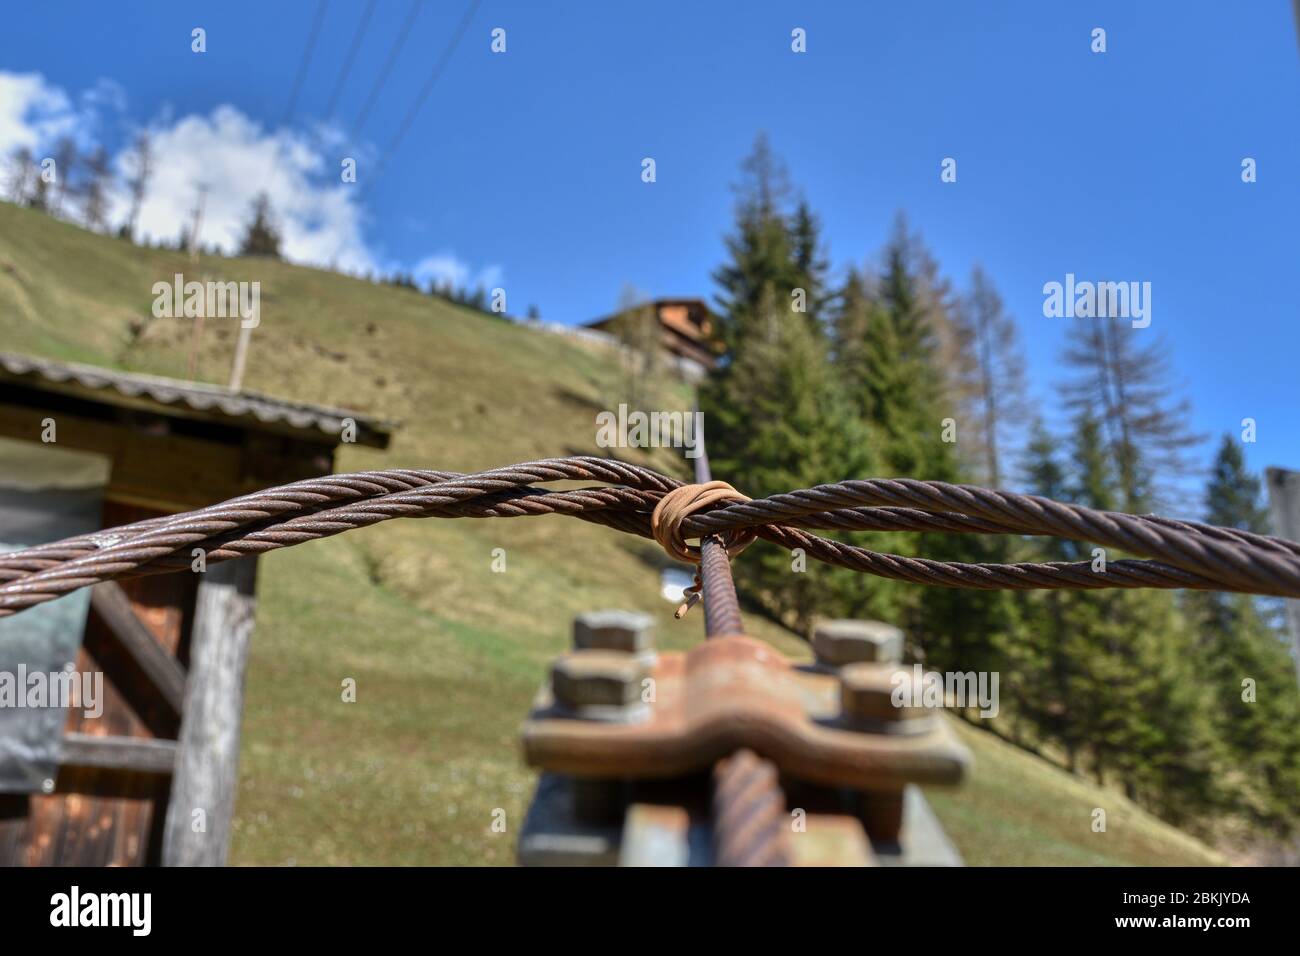 Stahlseil High Resolution Stock Photography and Images - Alamy